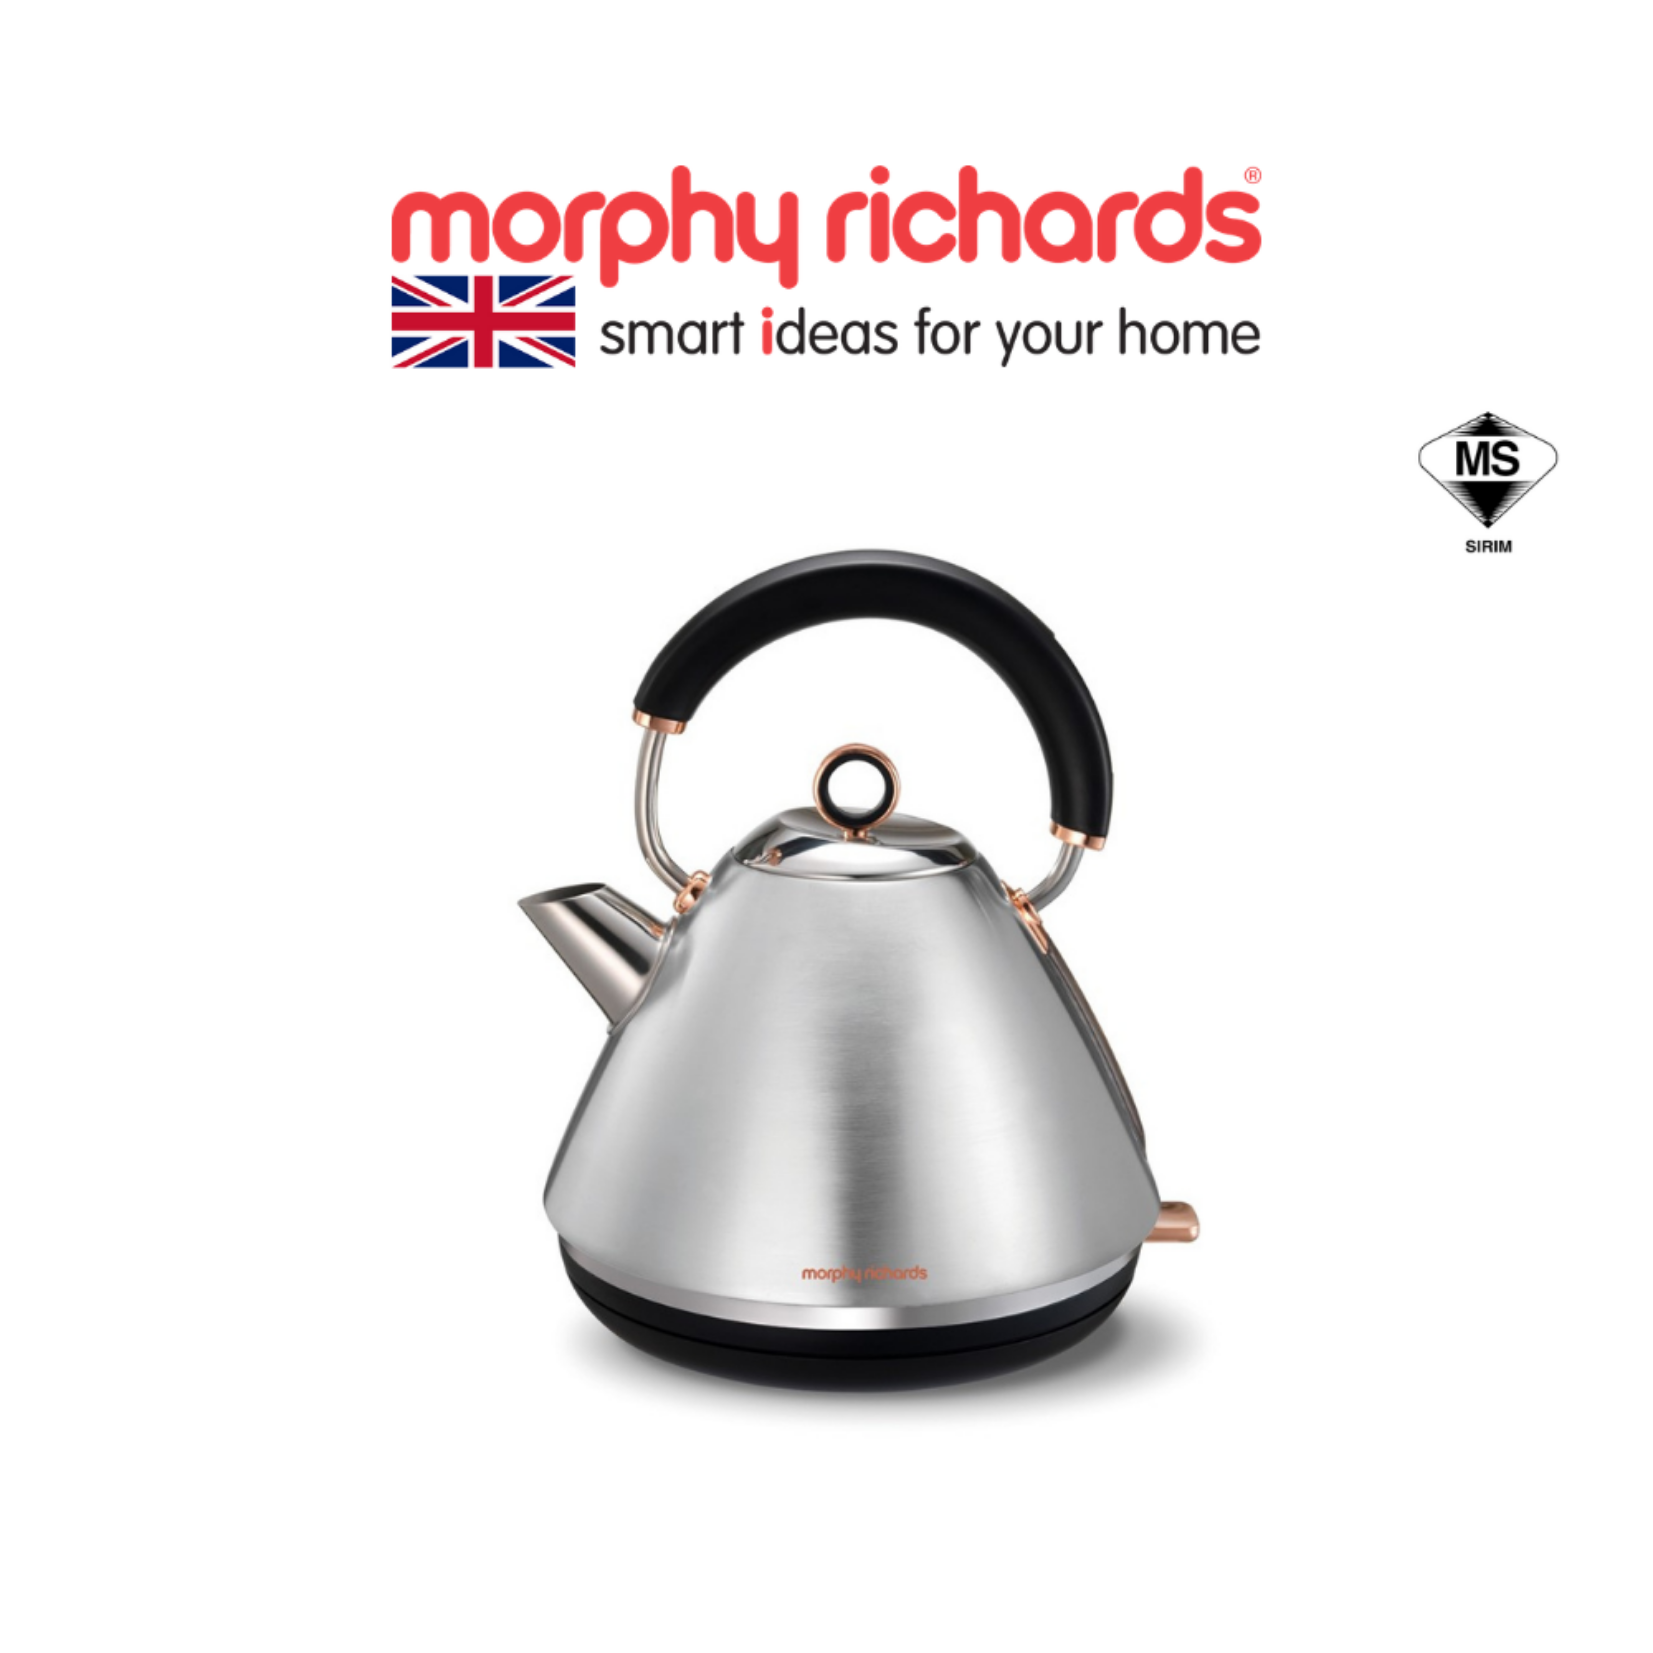 Morphy Richards Accents Rose Gold Kettle Brushed Metal - 1.5L Capacity | 2.2kw Power | Water Window